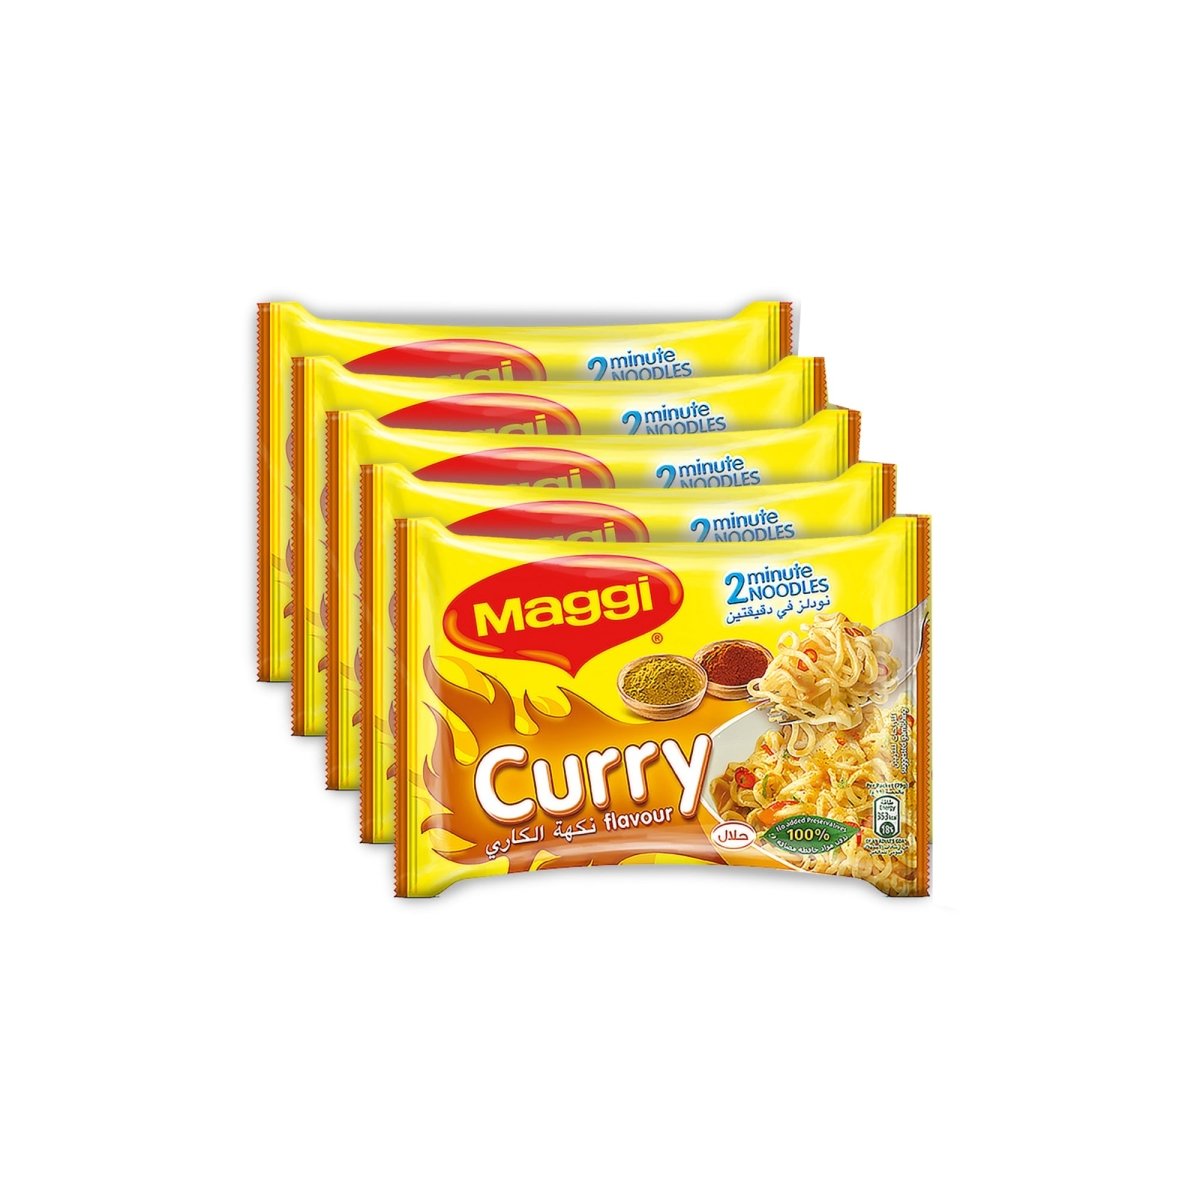 Maggi 2 Minute Curry Flavour Noodles - 5 Packs of 79g each - Tulsidas